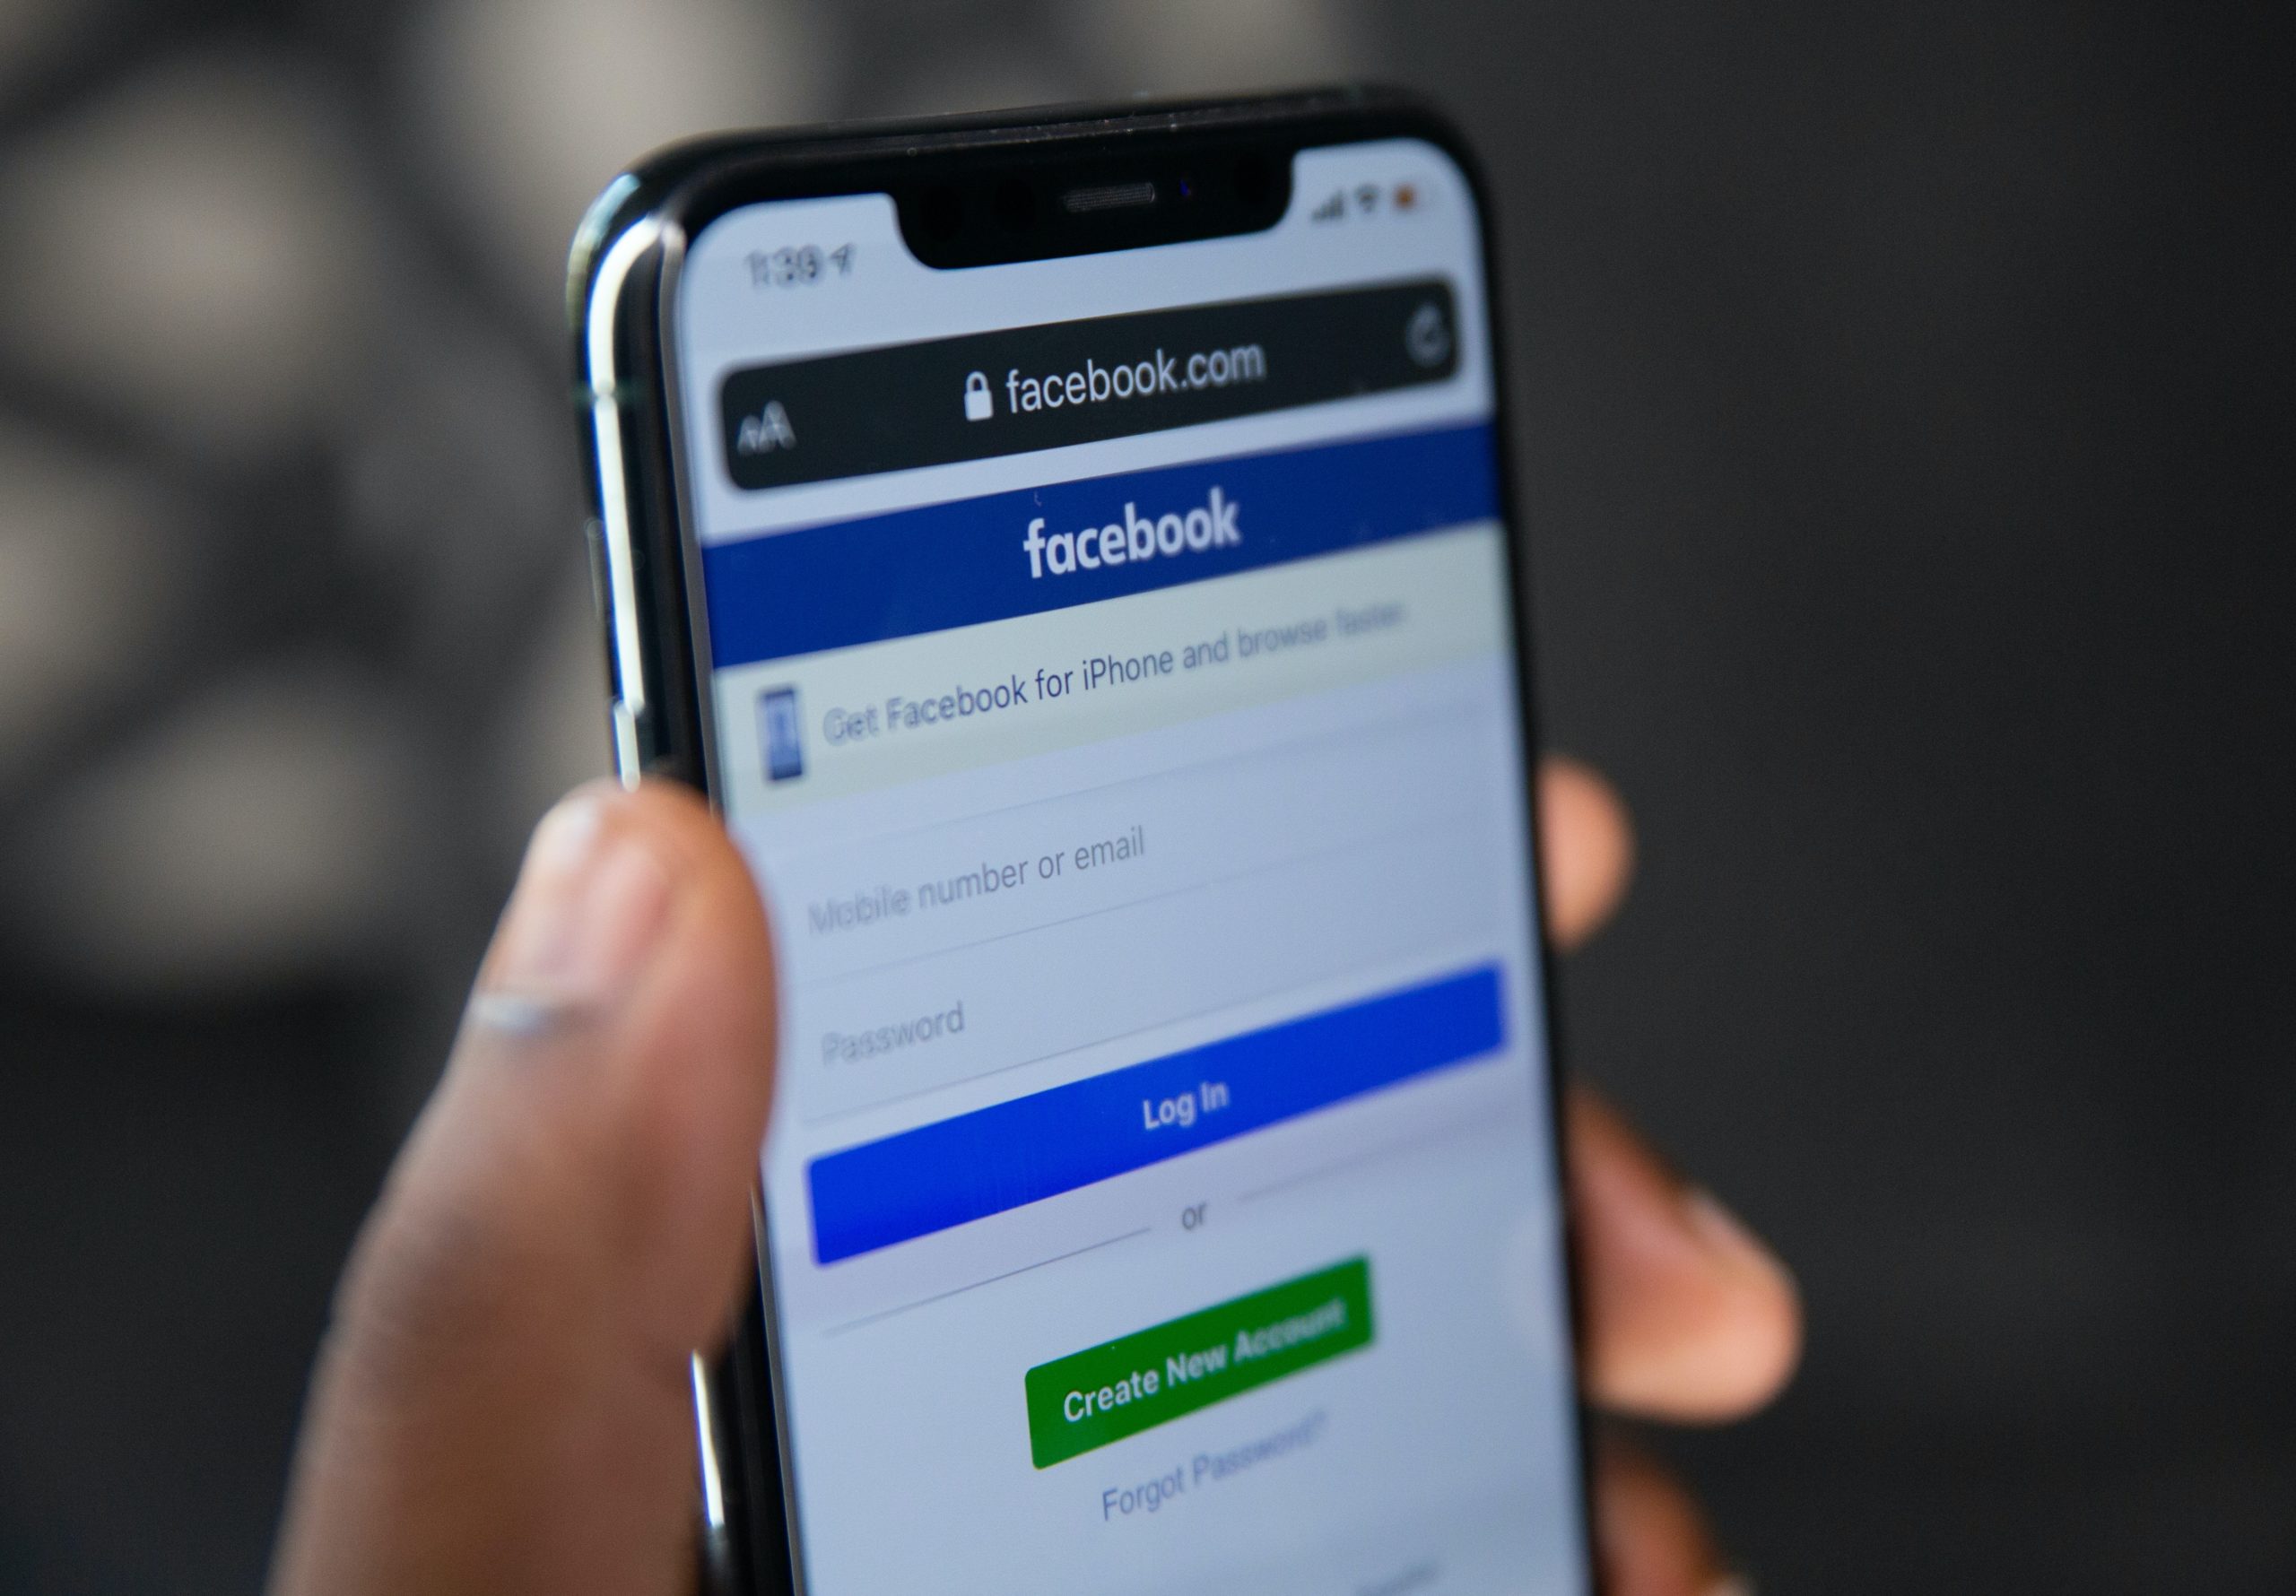 Newsletter – Facebook’s “Like” button and the need to update the communication policy on the processing of personal data